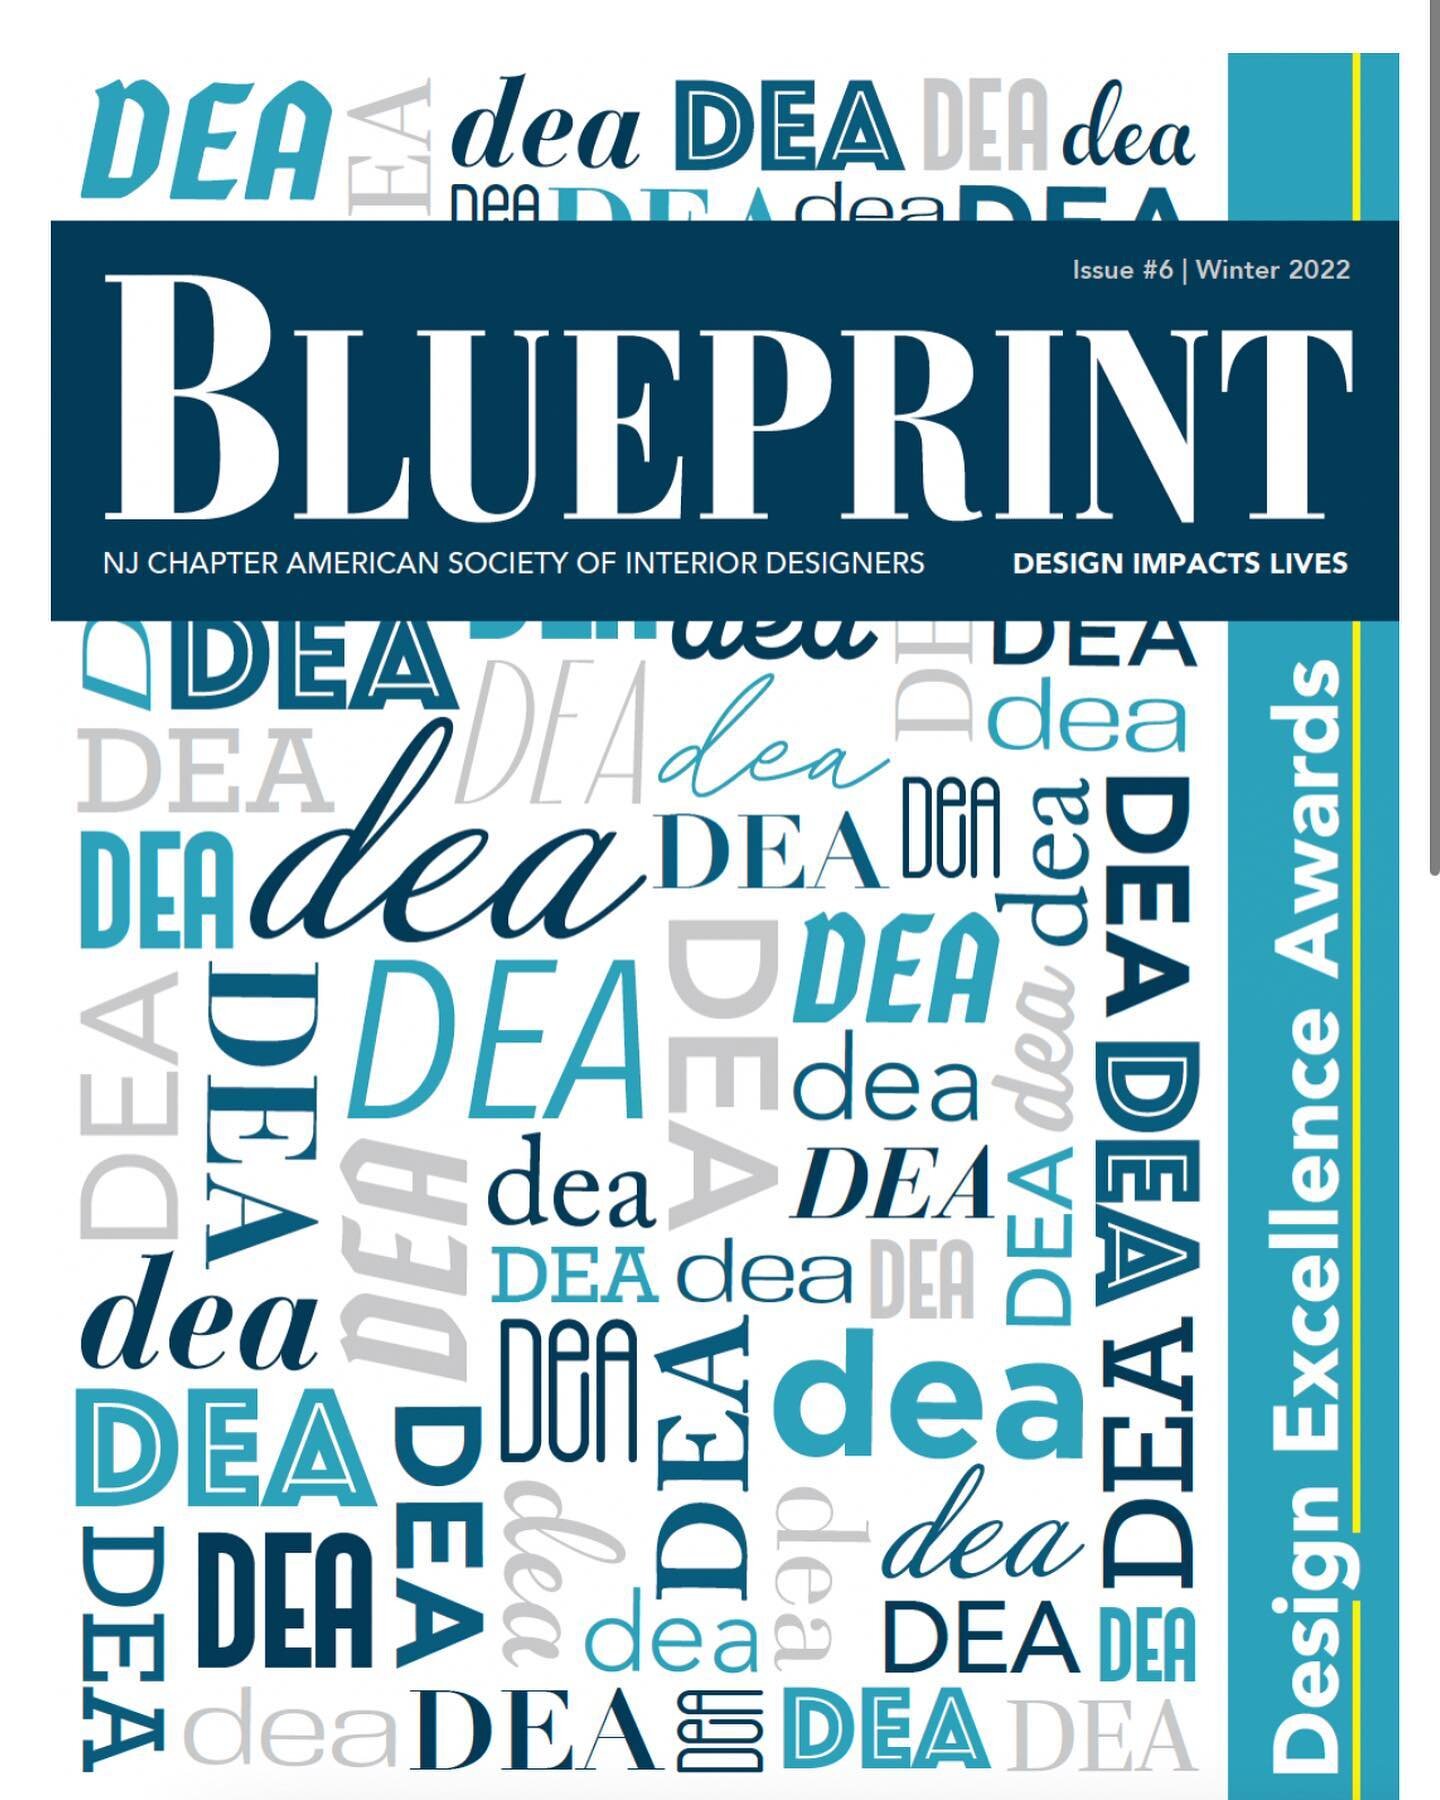 Oh wow what a week, publishing contributions on fire 🔥 My first edition of Blueprint magazine as the editor is now live on @asidnj website. @njhomemag and @bergenmagnj published their magazines in print and kindly included me in the articles on tips